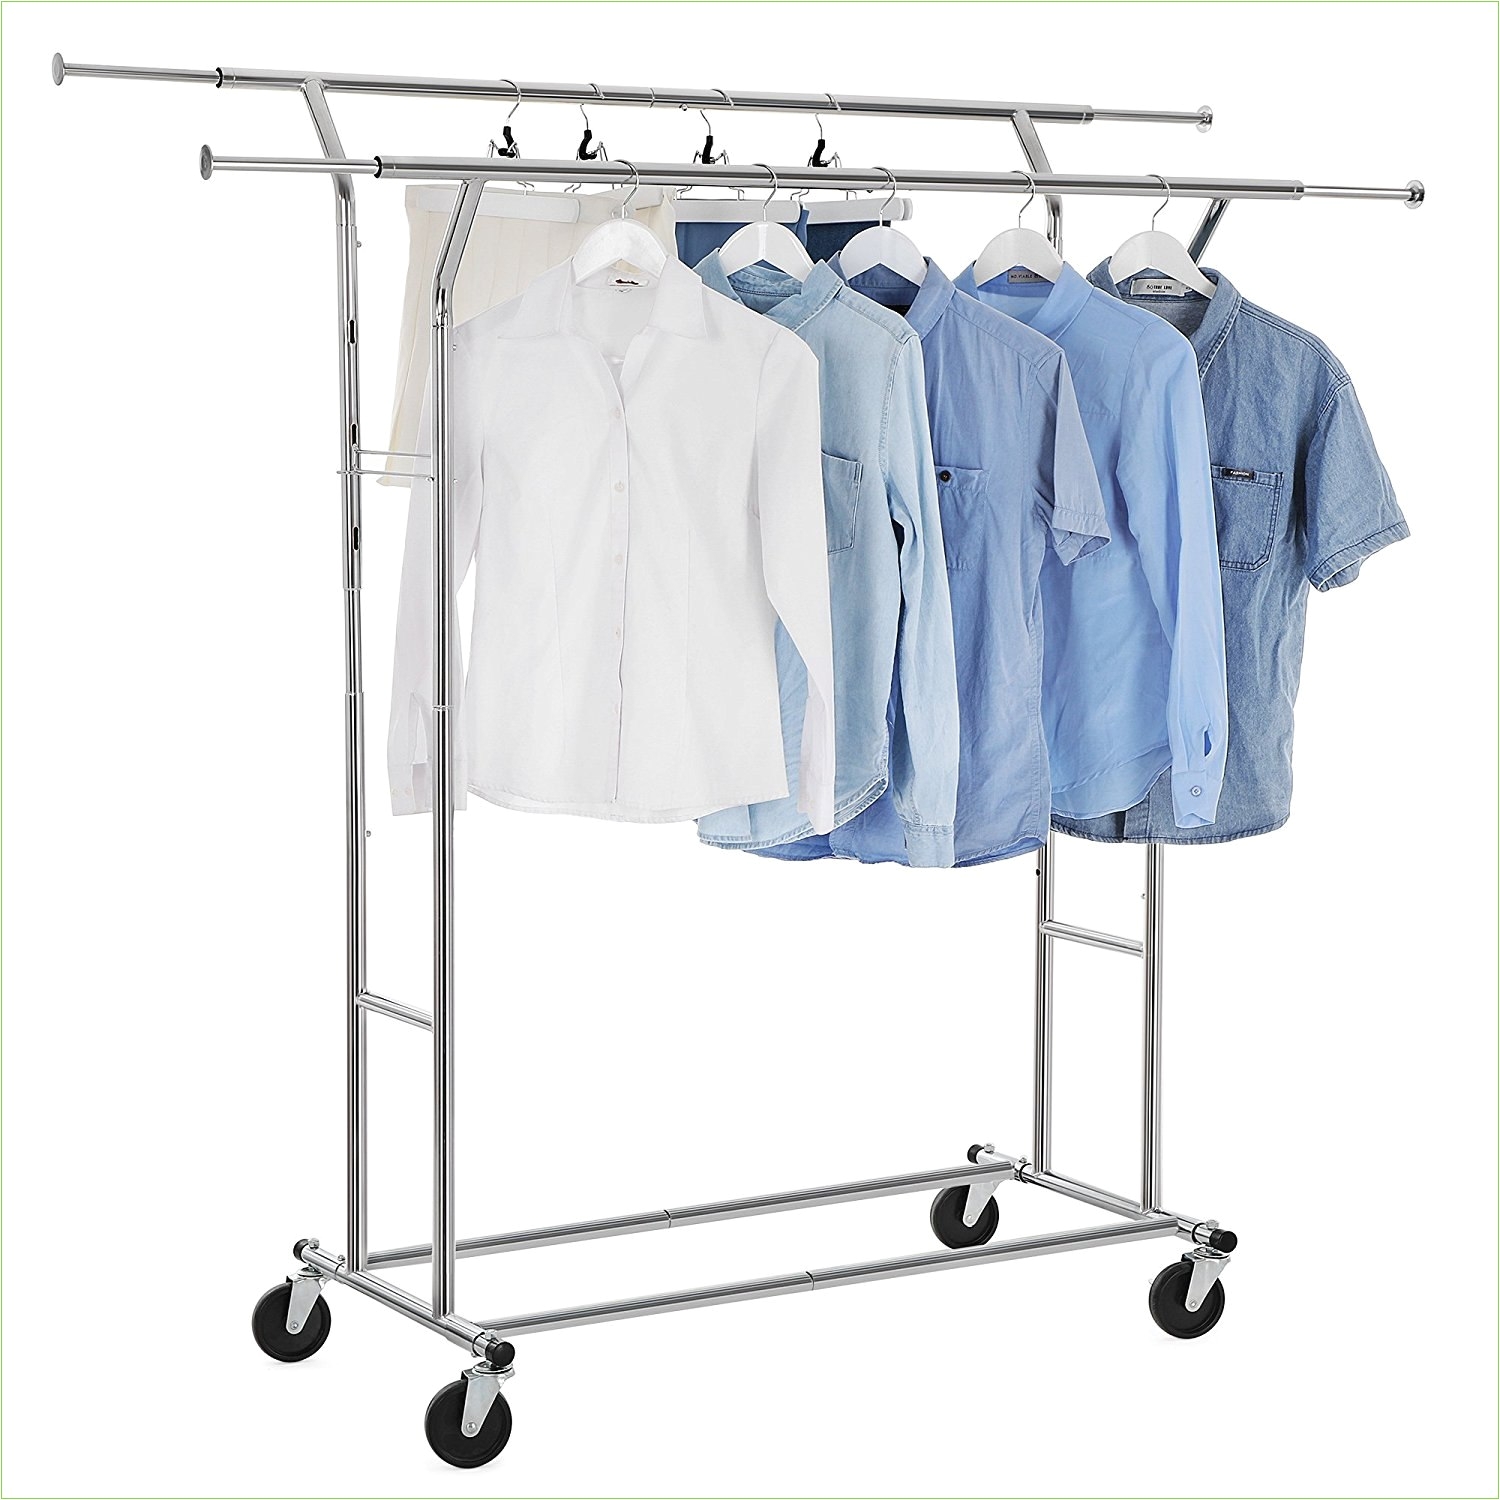 uline clothes rack awesome shop amazon garment racks of luxury uline clothes rack lovely